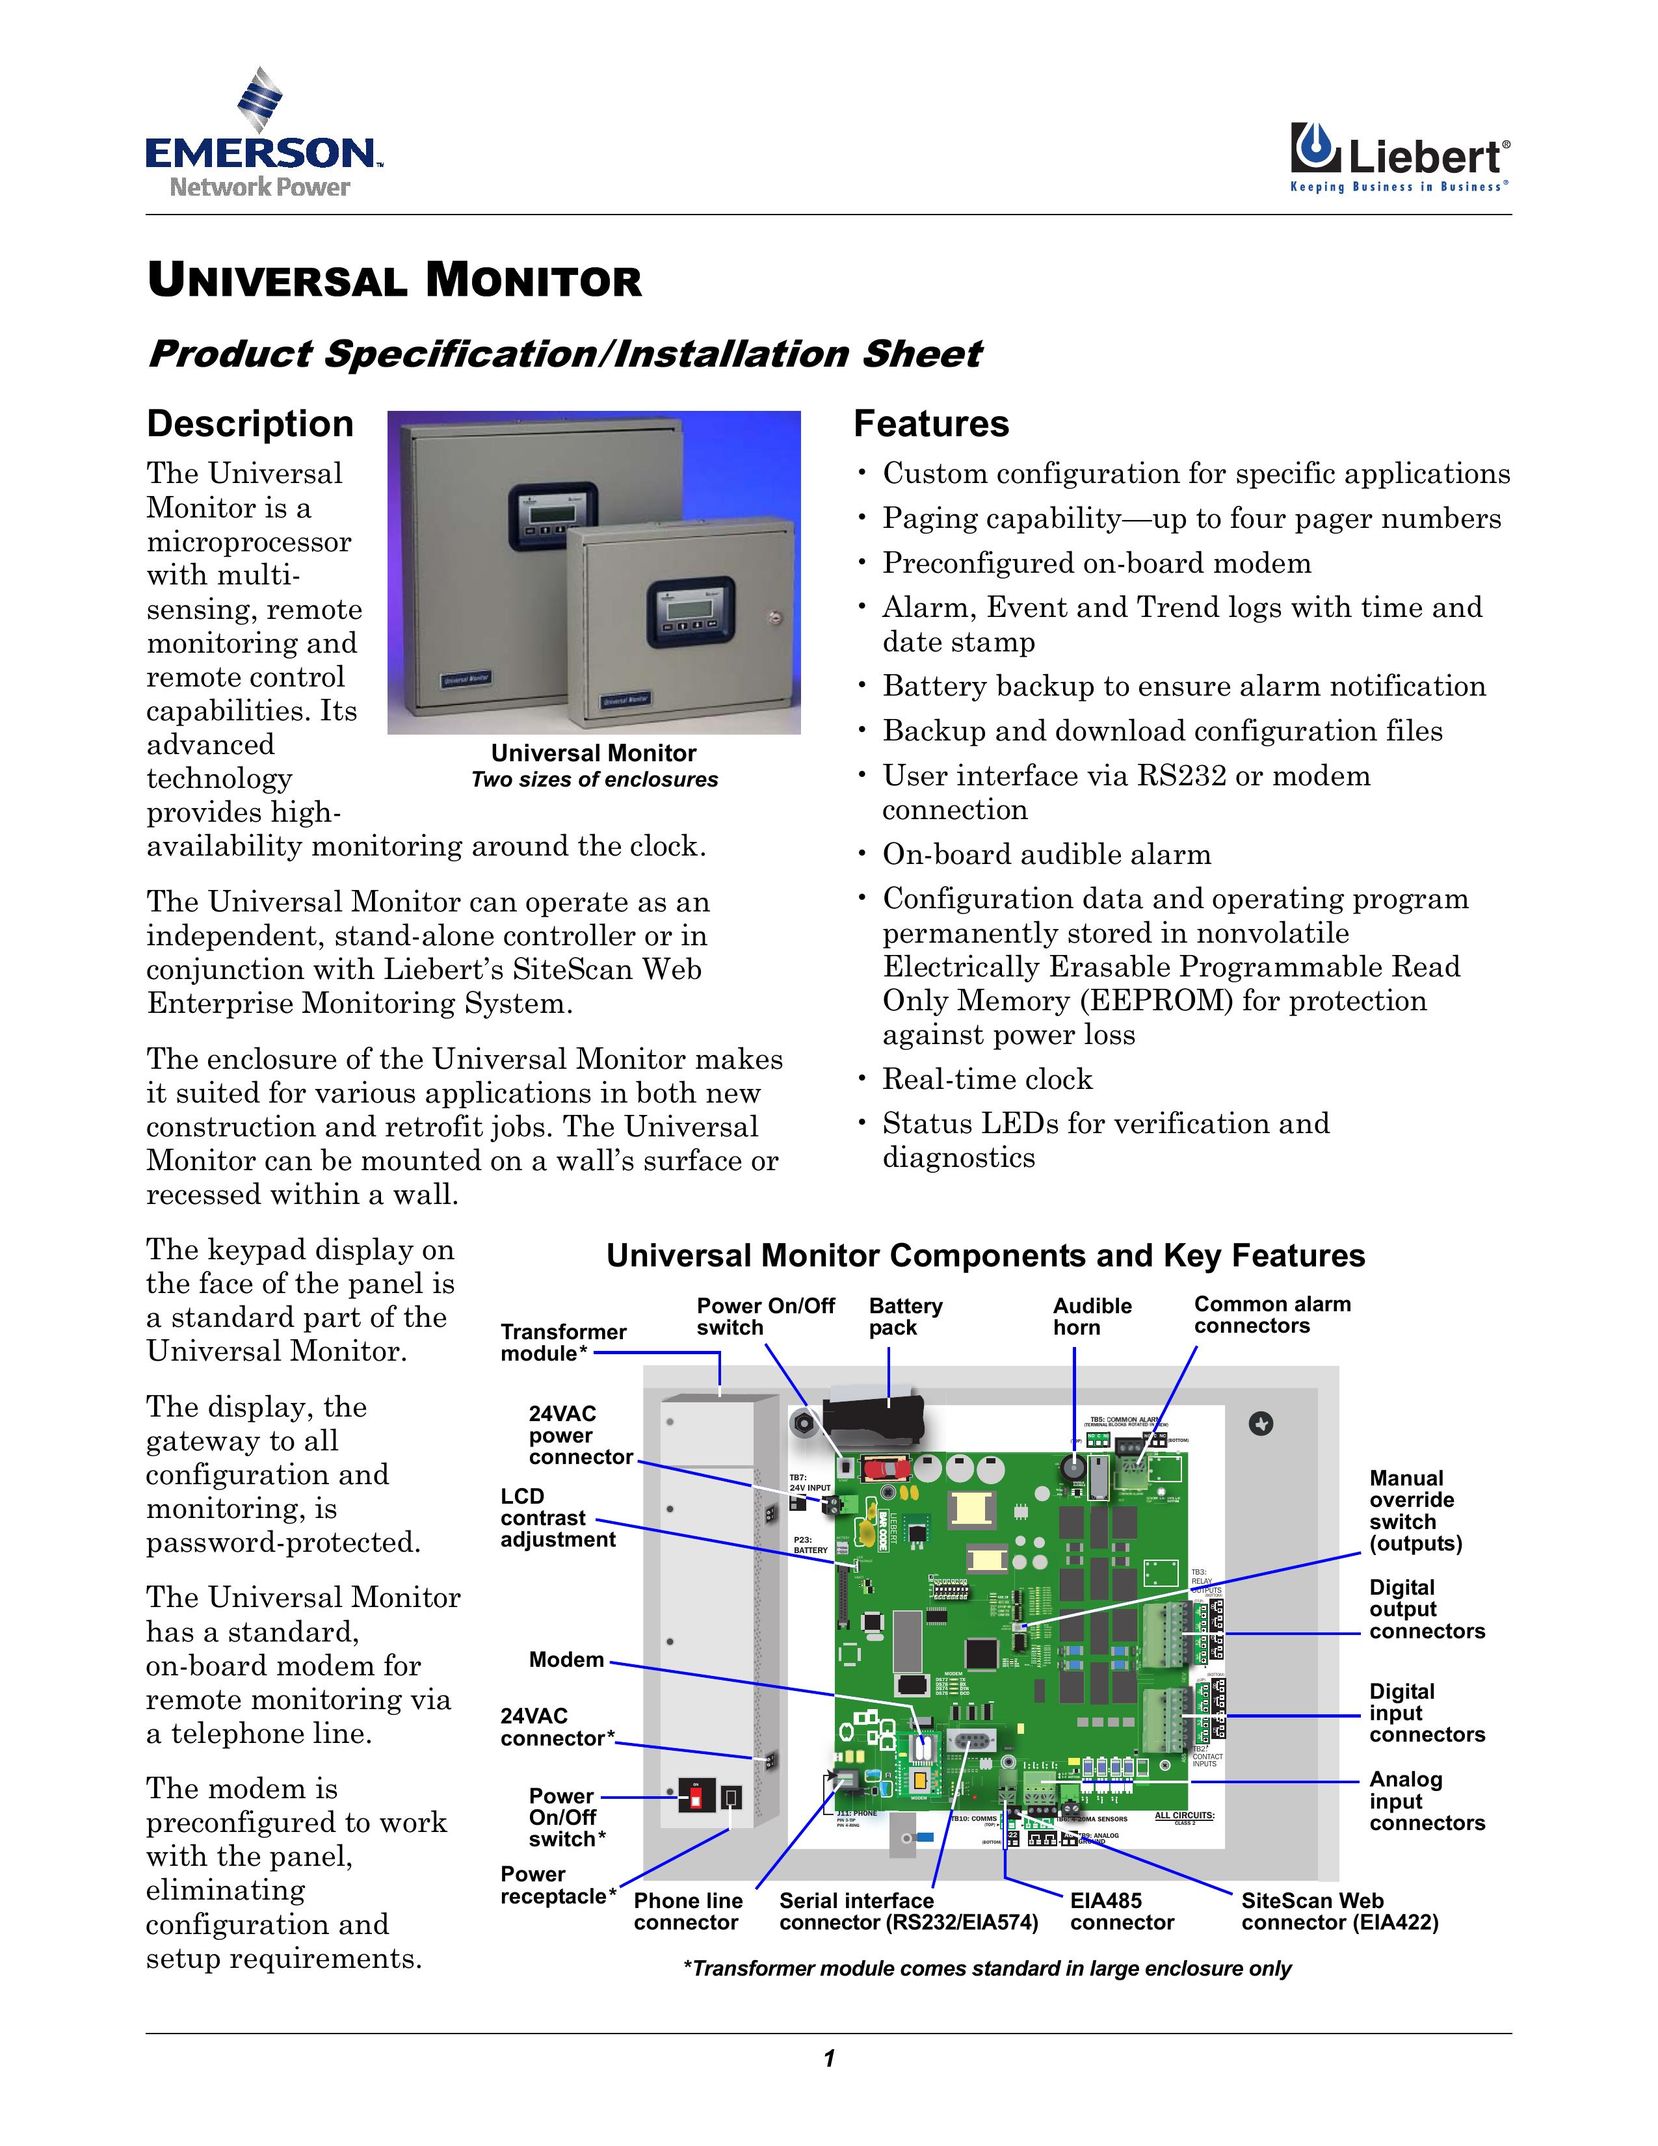 Emerson UML11500 Pager User Manual